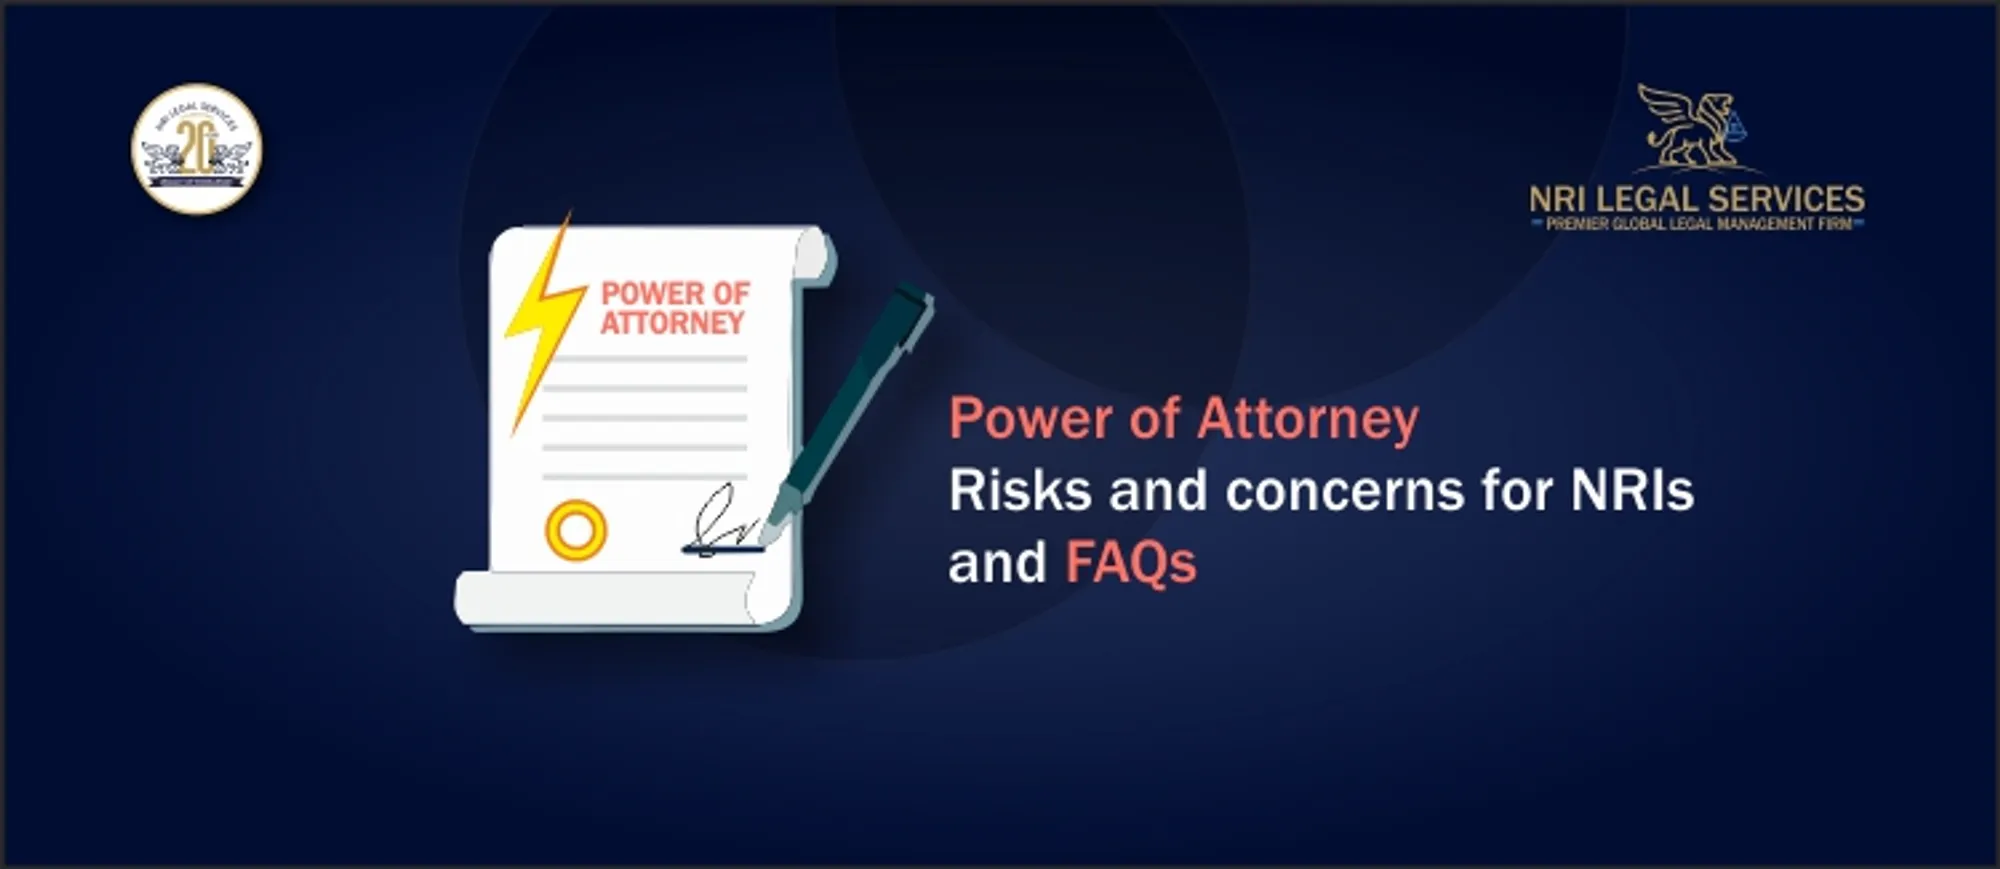 Power of Attorney | Risks and concerns for NRIs | FAQs